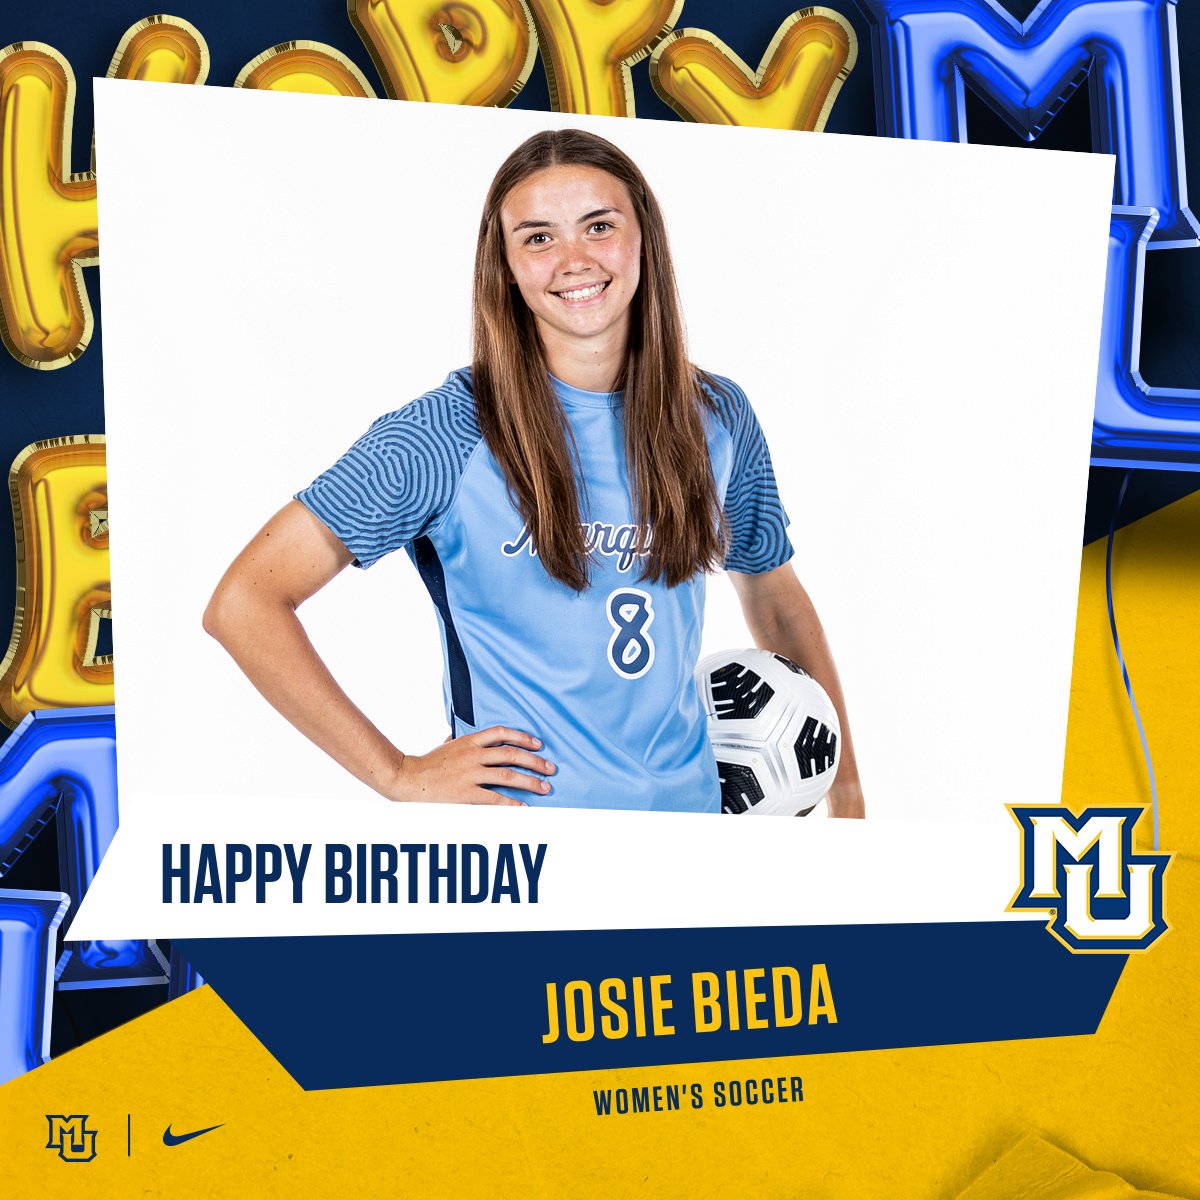 Join us in wishing a happy birthday to Josie Bieda, we hope you have a great day Josie, enjoy it! 🥳🎂 

#WeAreMarquette